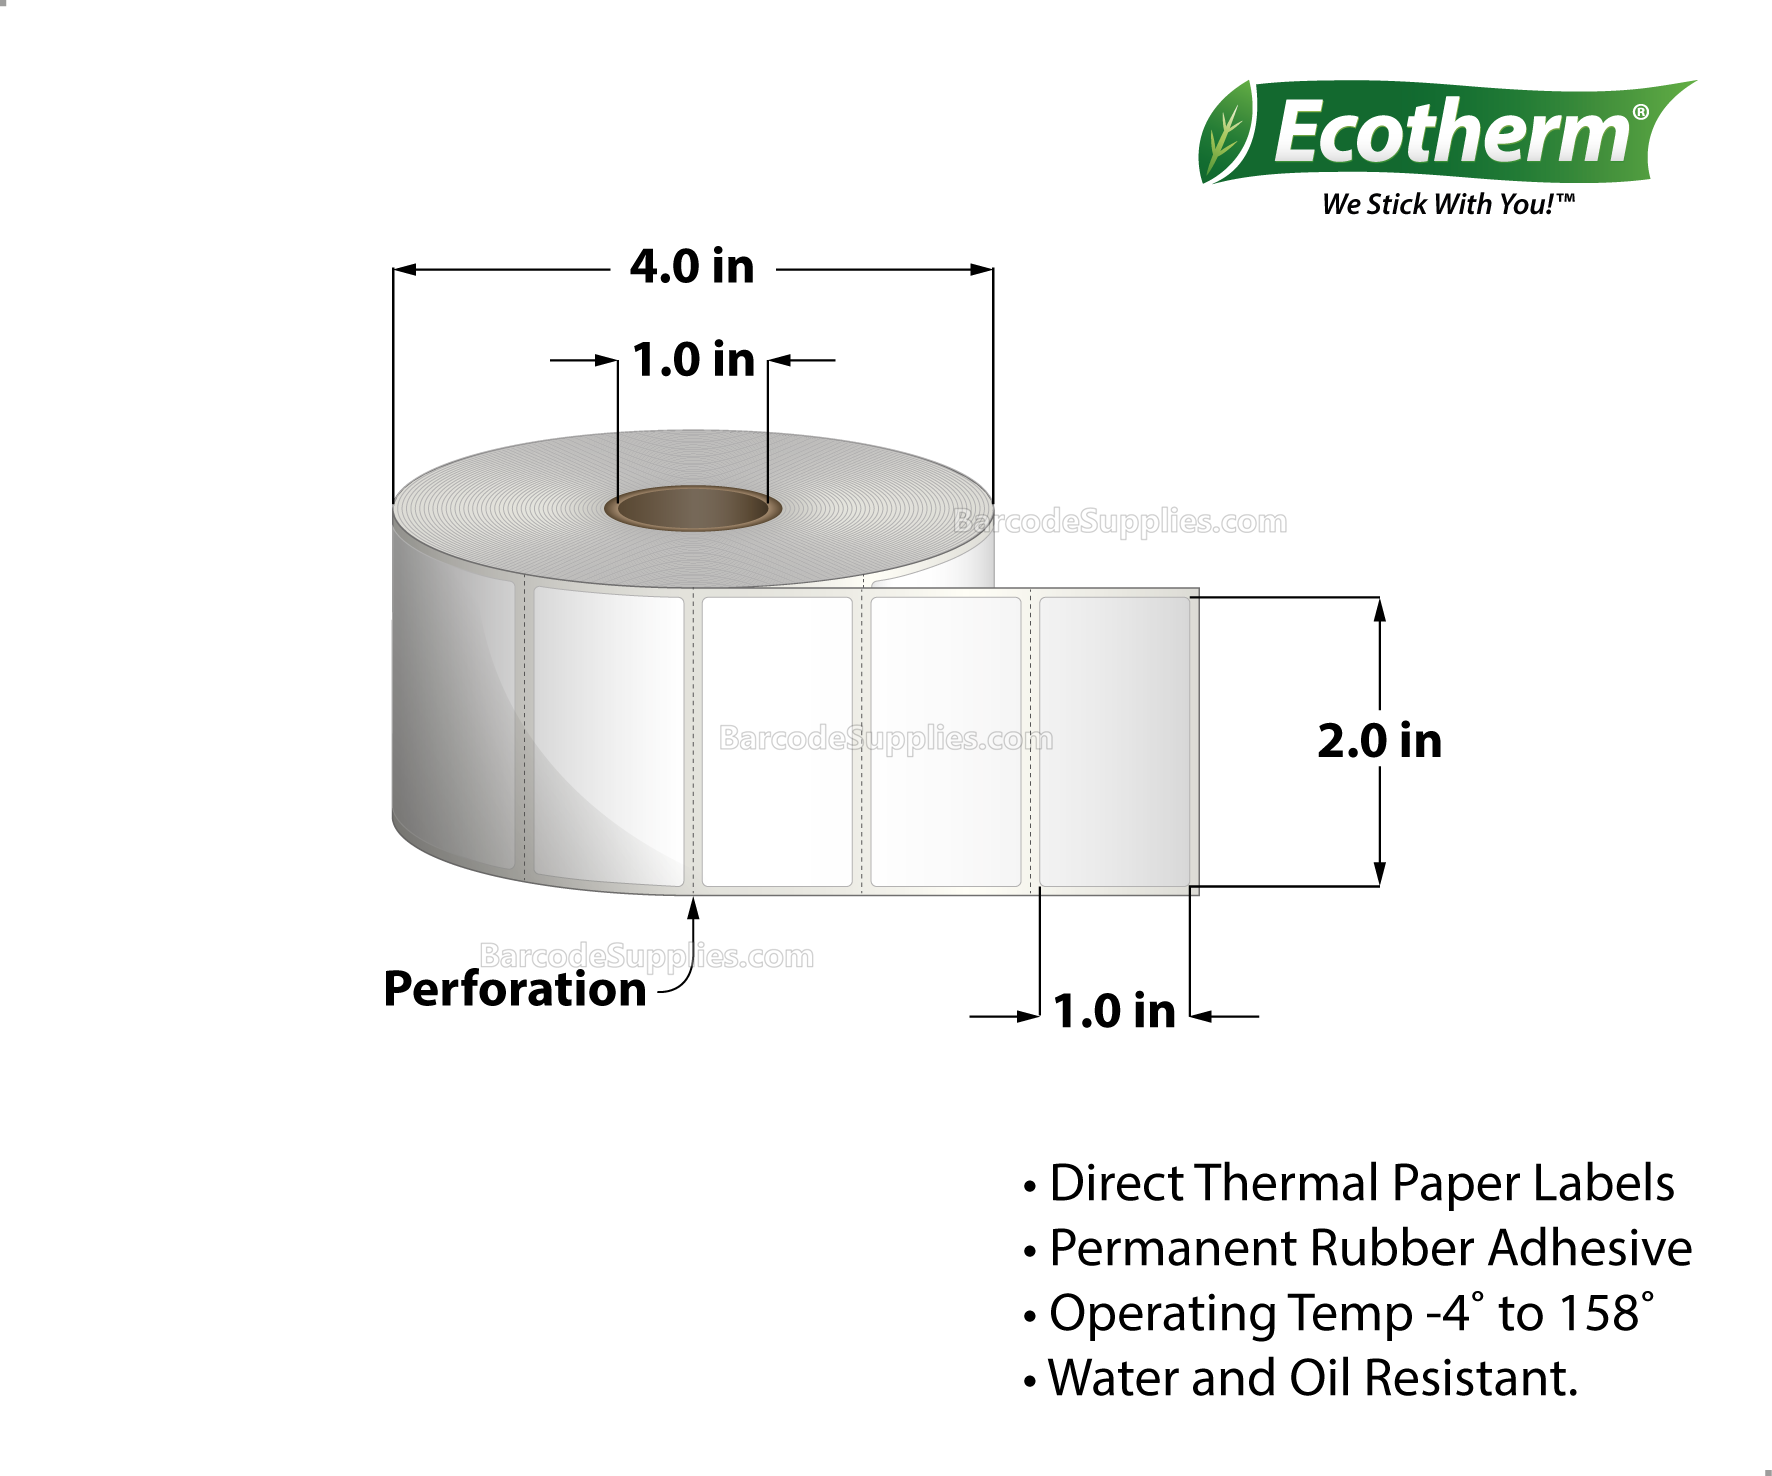 2 x 1 Direct Thermal White Labels With Rubber Adhesive - Perforated - 1400 Labels Per Roll - Carton Of 4 Rolls - 5600 Labels Total - MPN: ECOTHERM14120-4